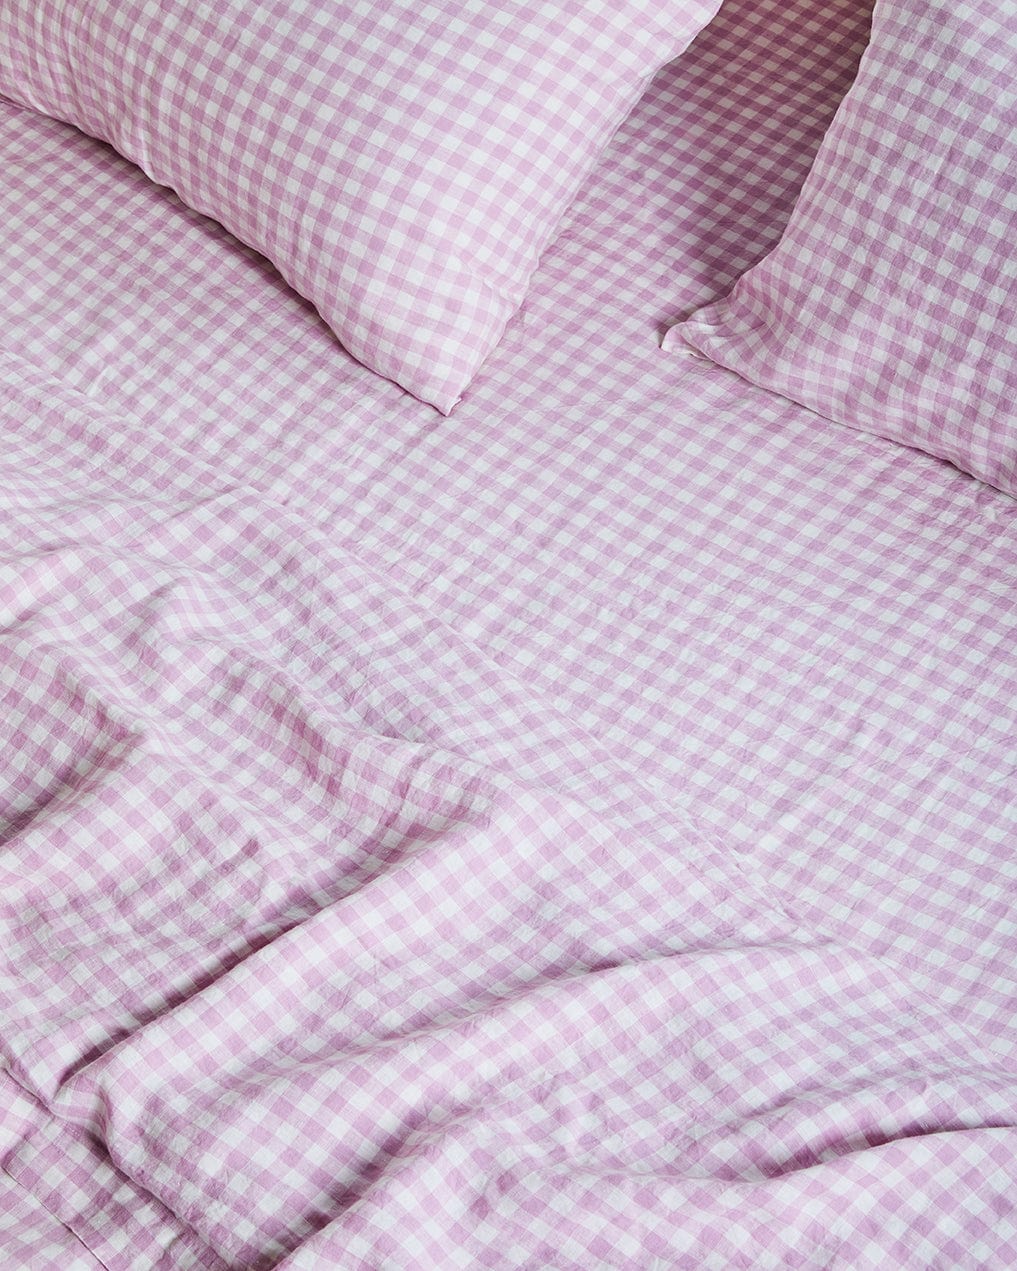 Lilac Gingham – Linen Fitted Sheet